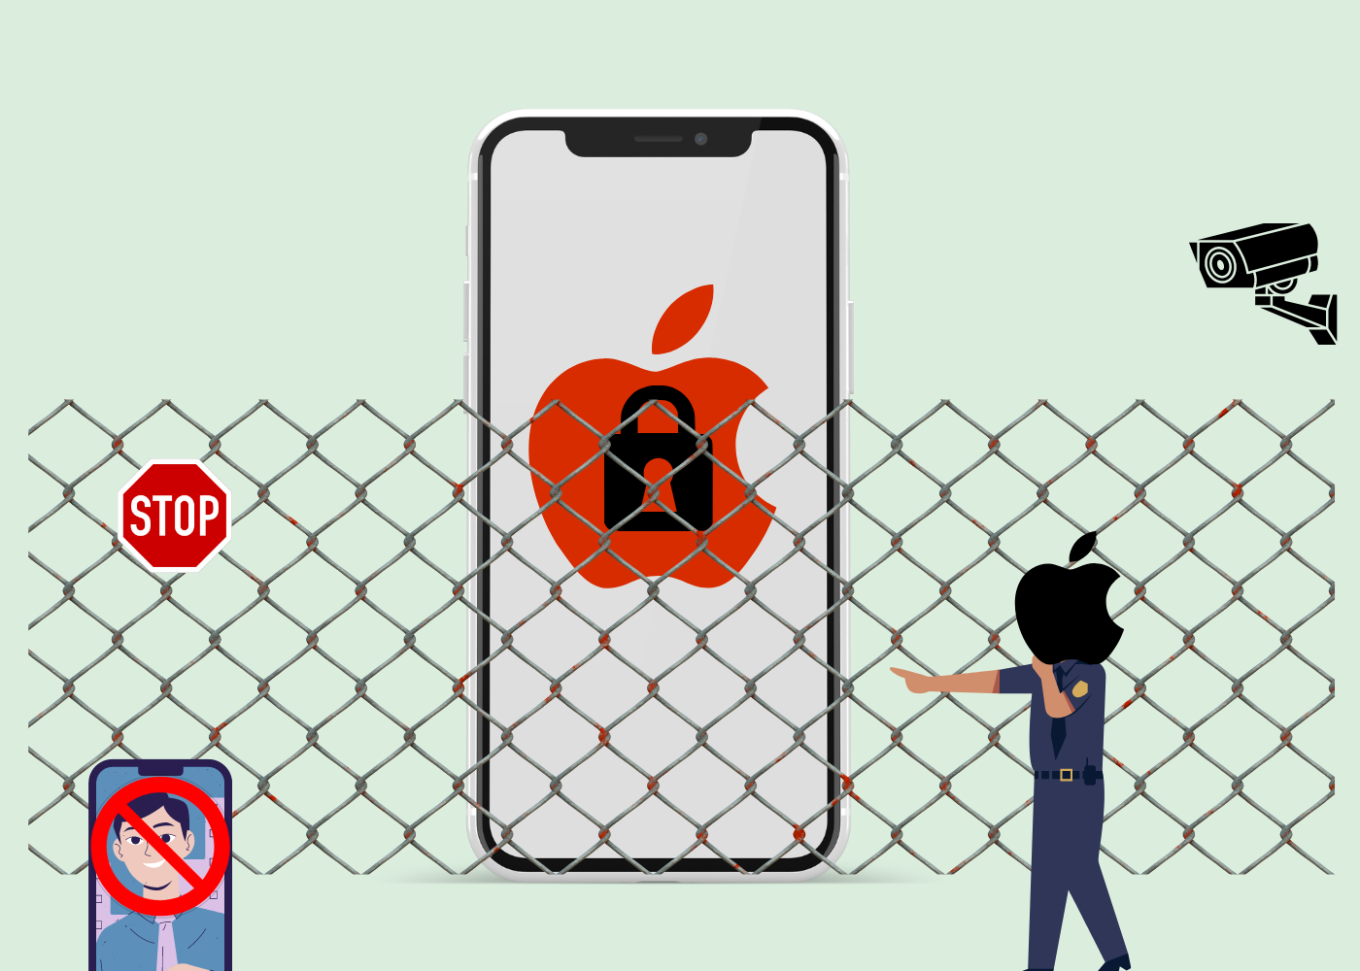 Apple fits its devices with a hyper-secure lockdown mode